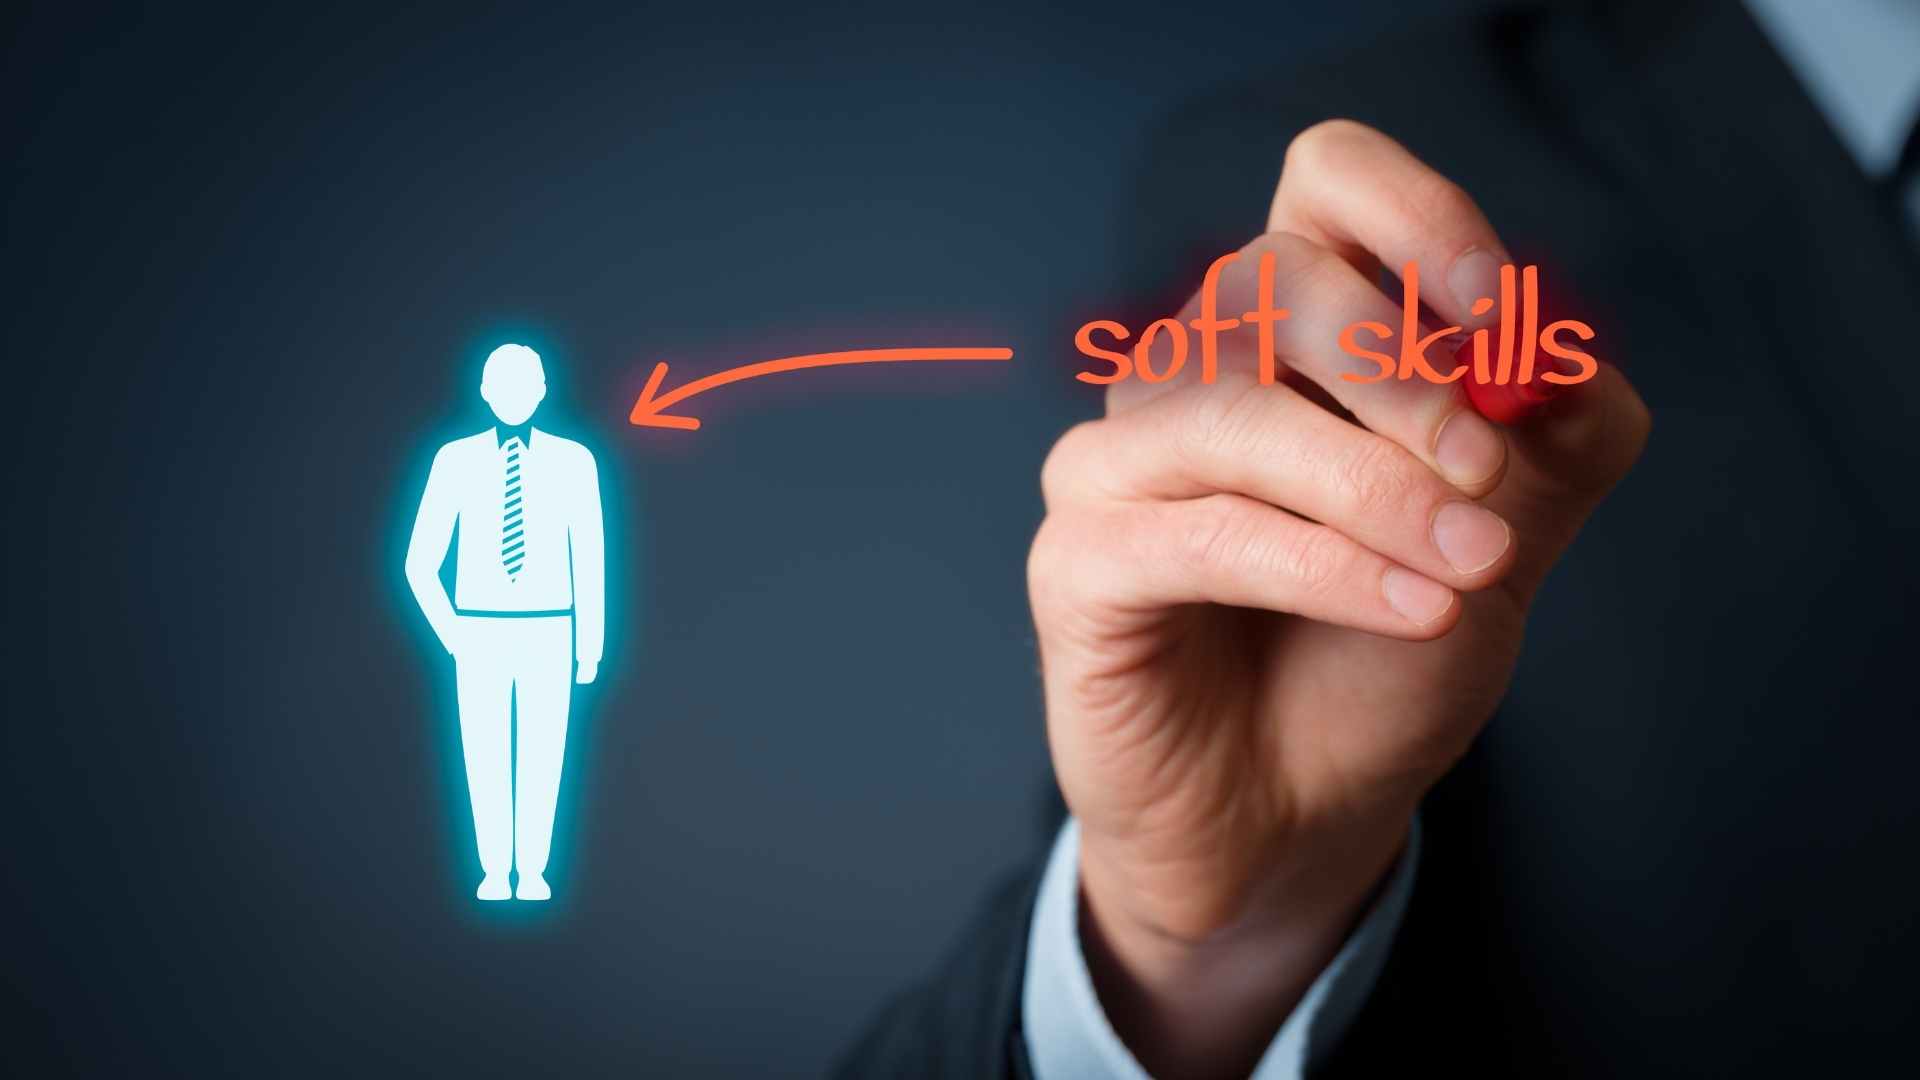 Top 5 Soft Skills For Organizations in 2021